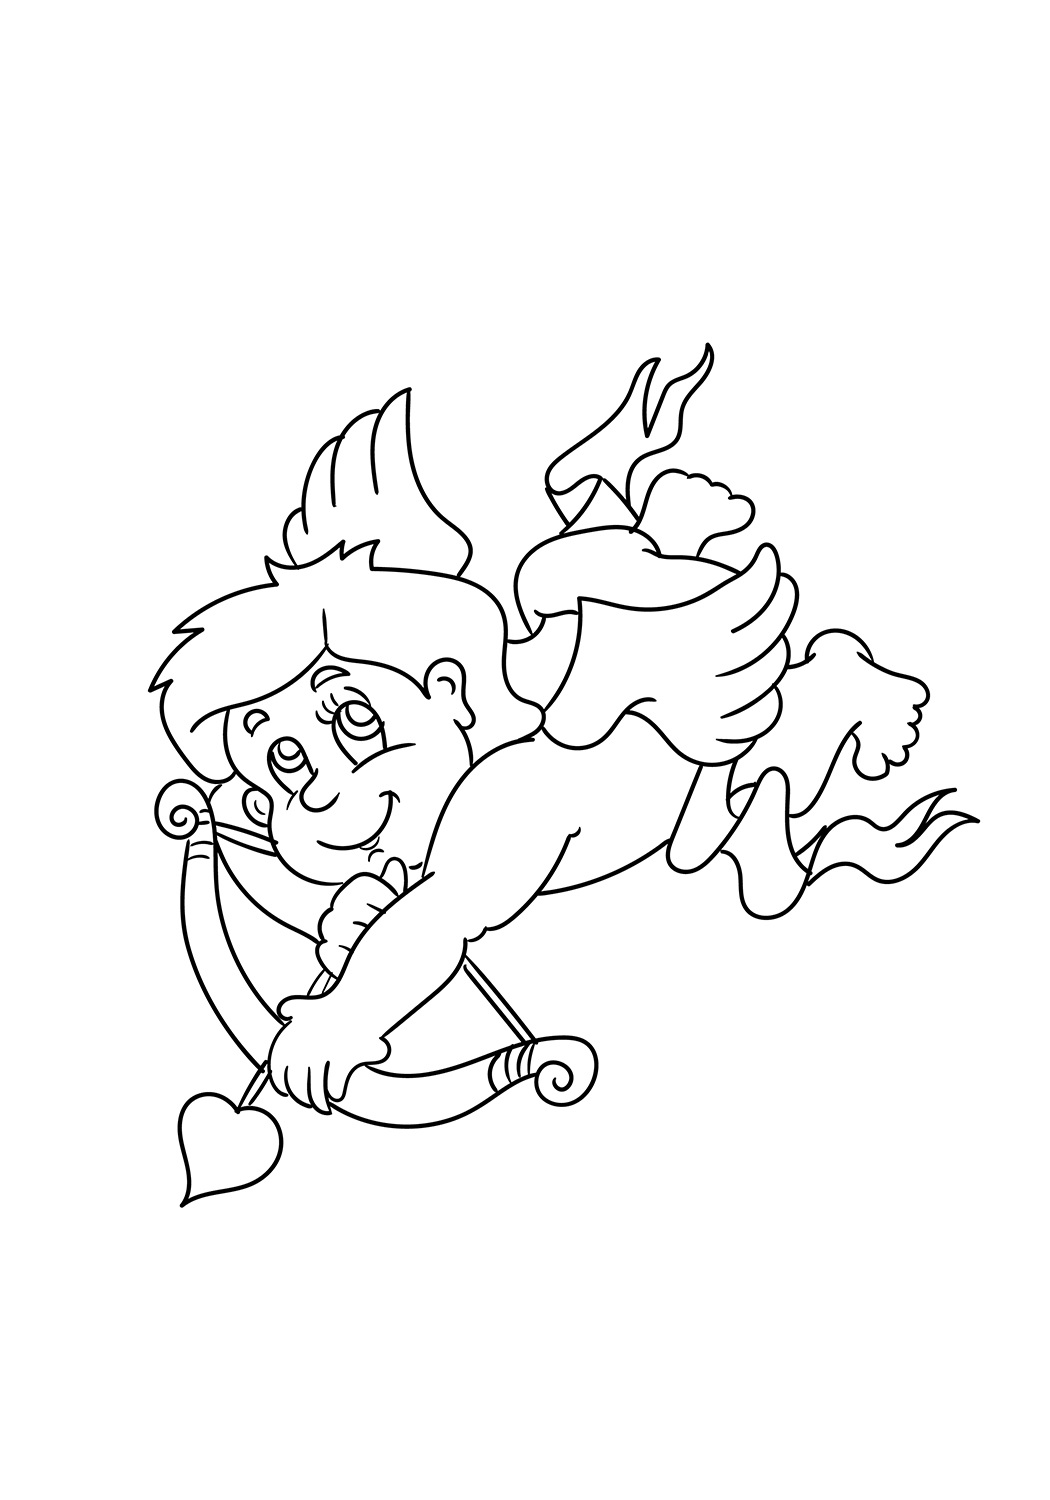 Cupid Is Smiling Coloring Page - Free Printable Coloring Pages for Kids